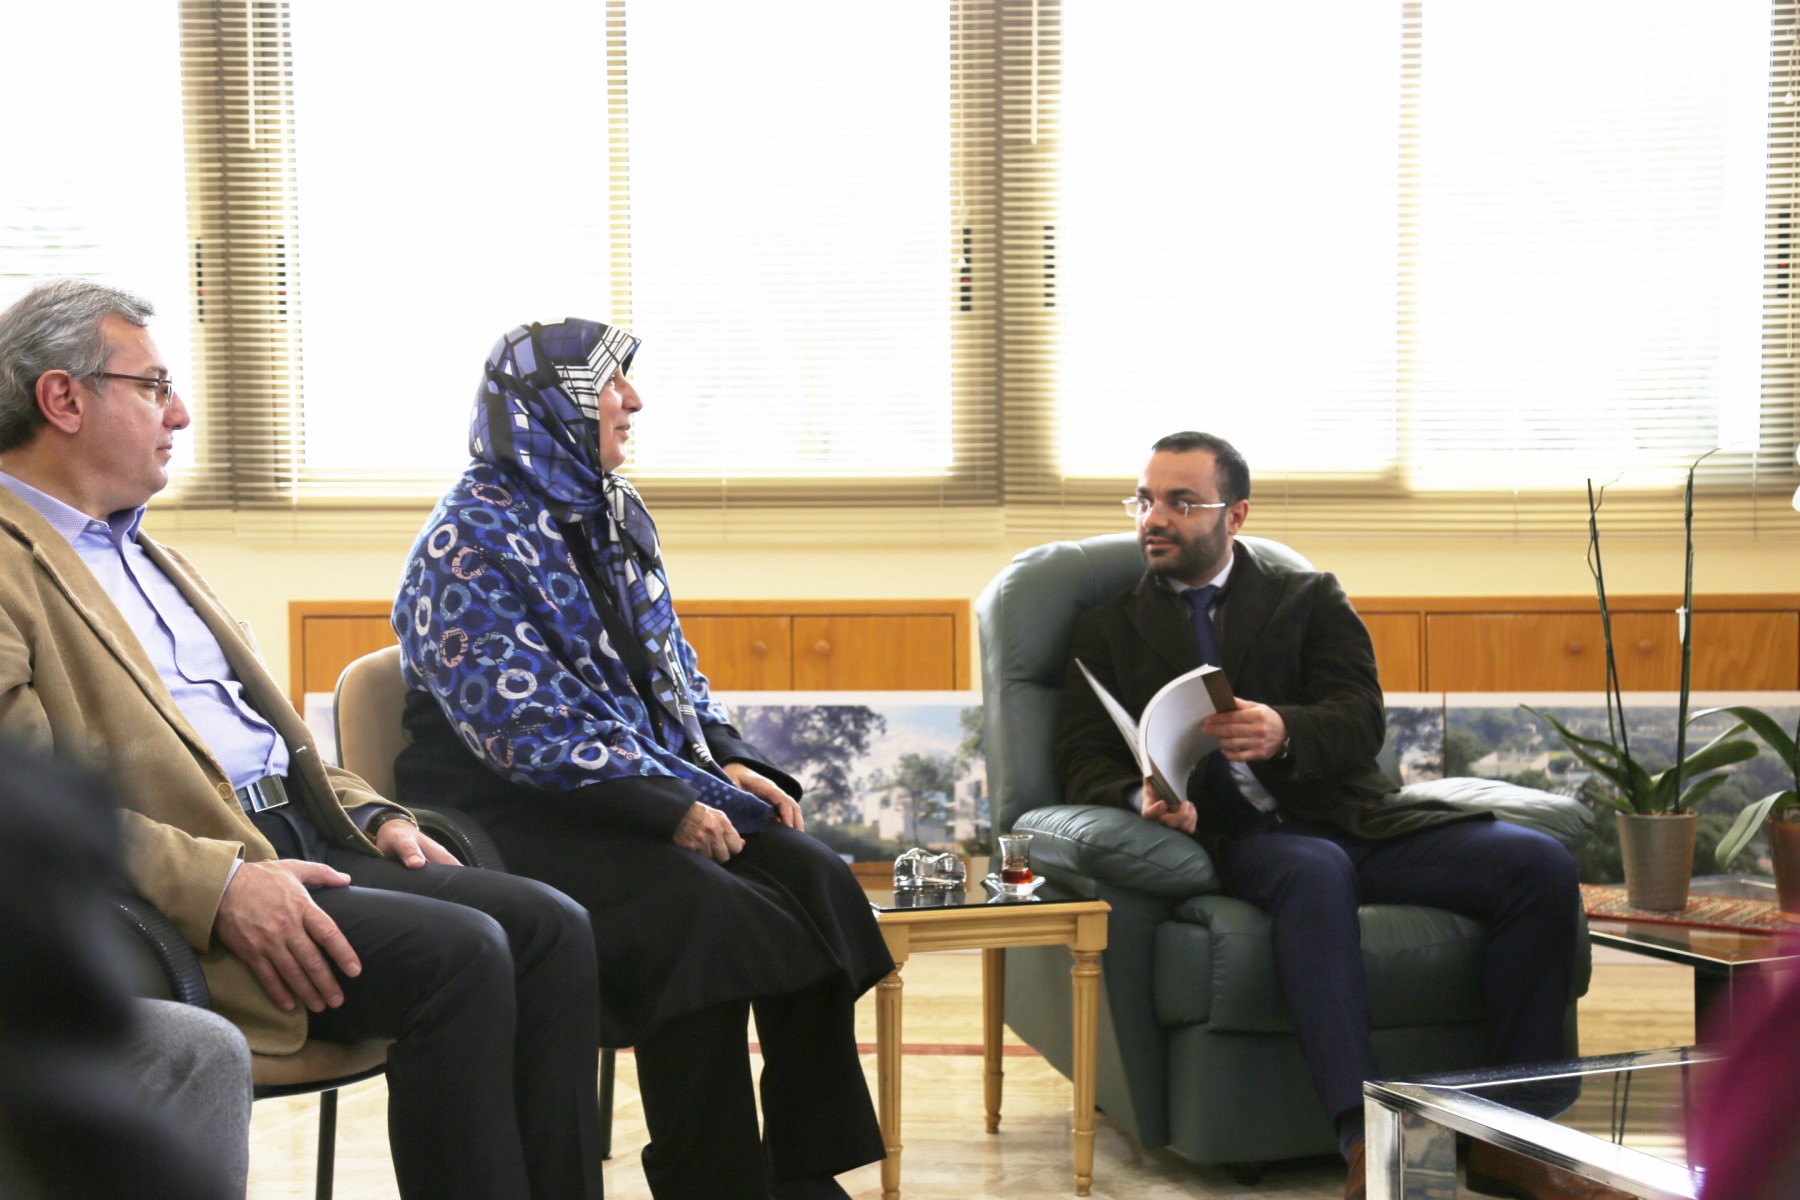 His Excellency Dr. Mohammad Daoud, Minister of Culture visits the Imam Sadr Foundation